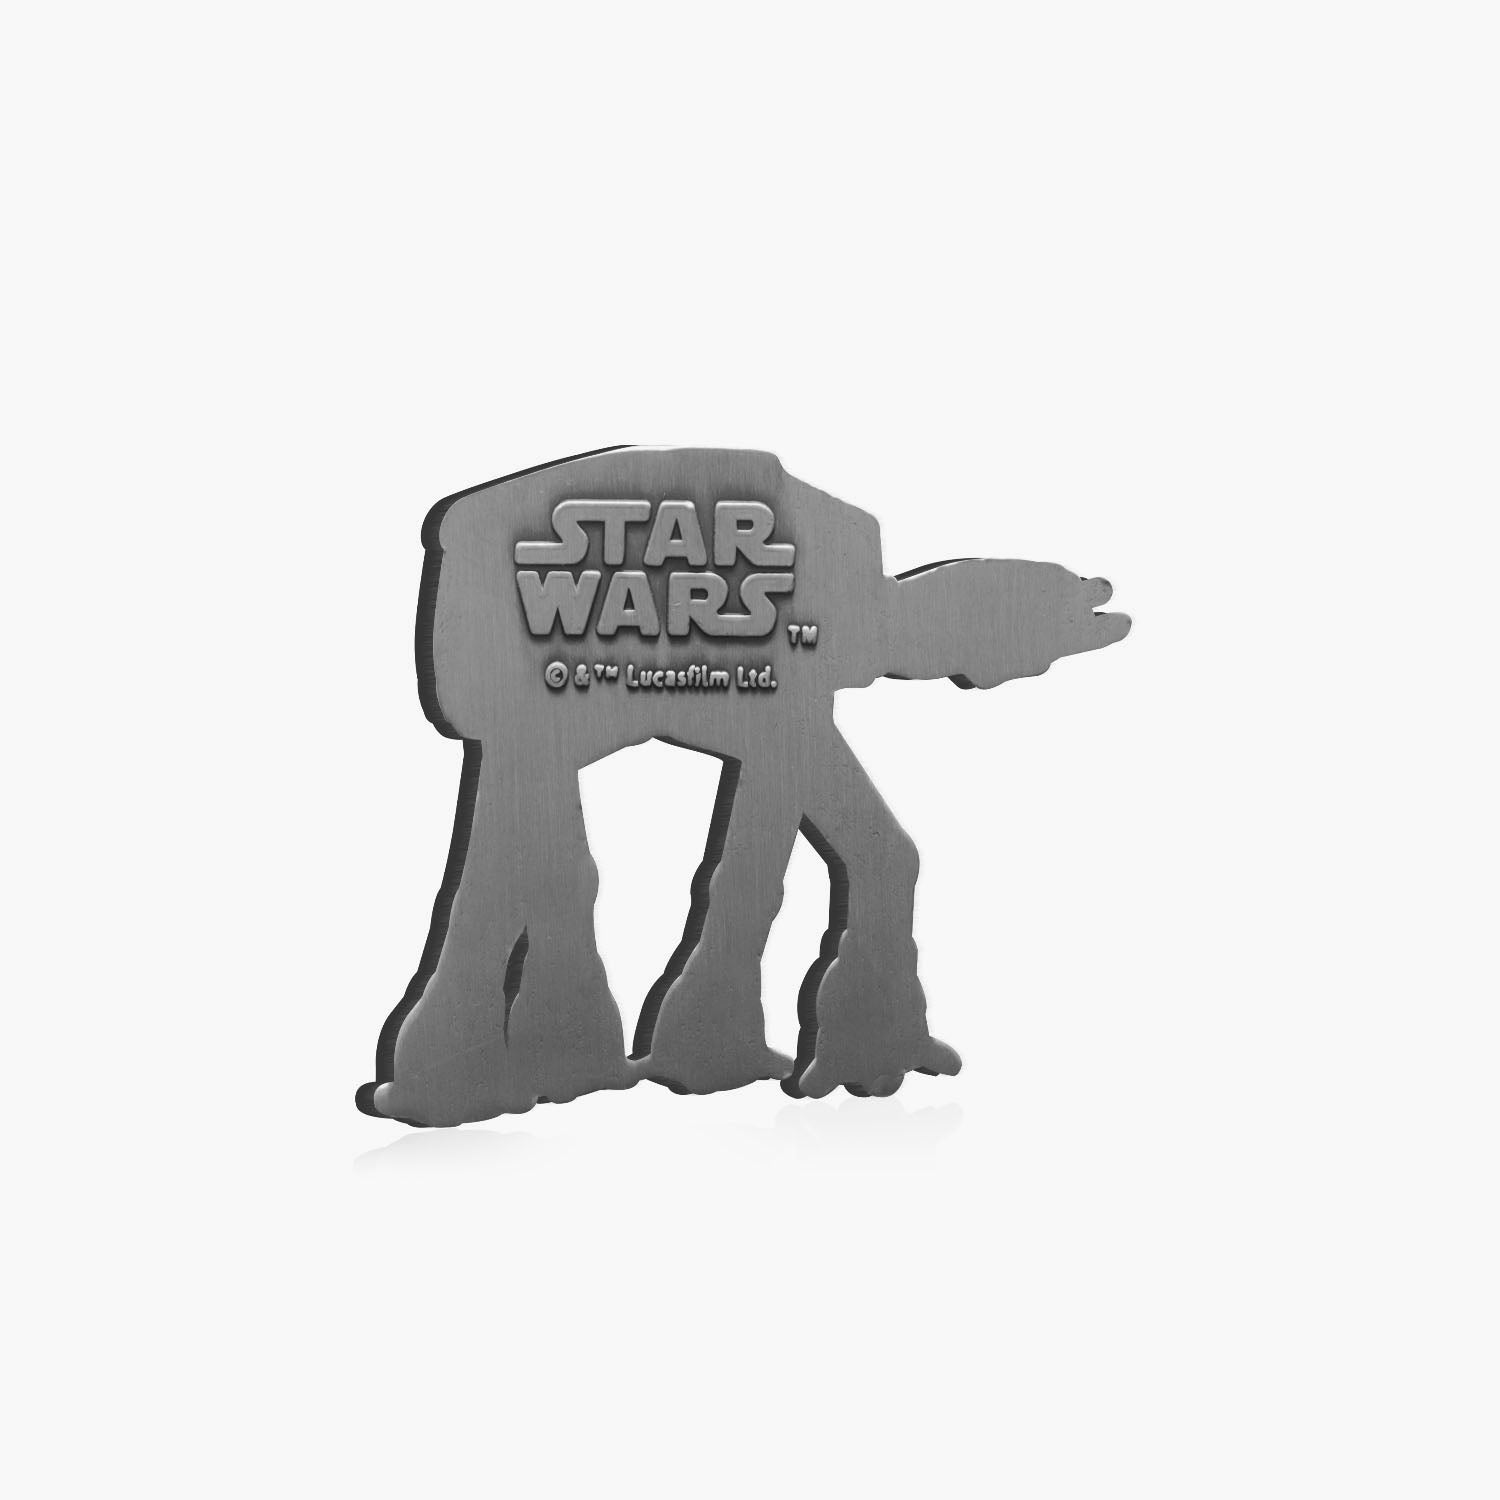 Official AT-AT Walker Shaped Commemorative